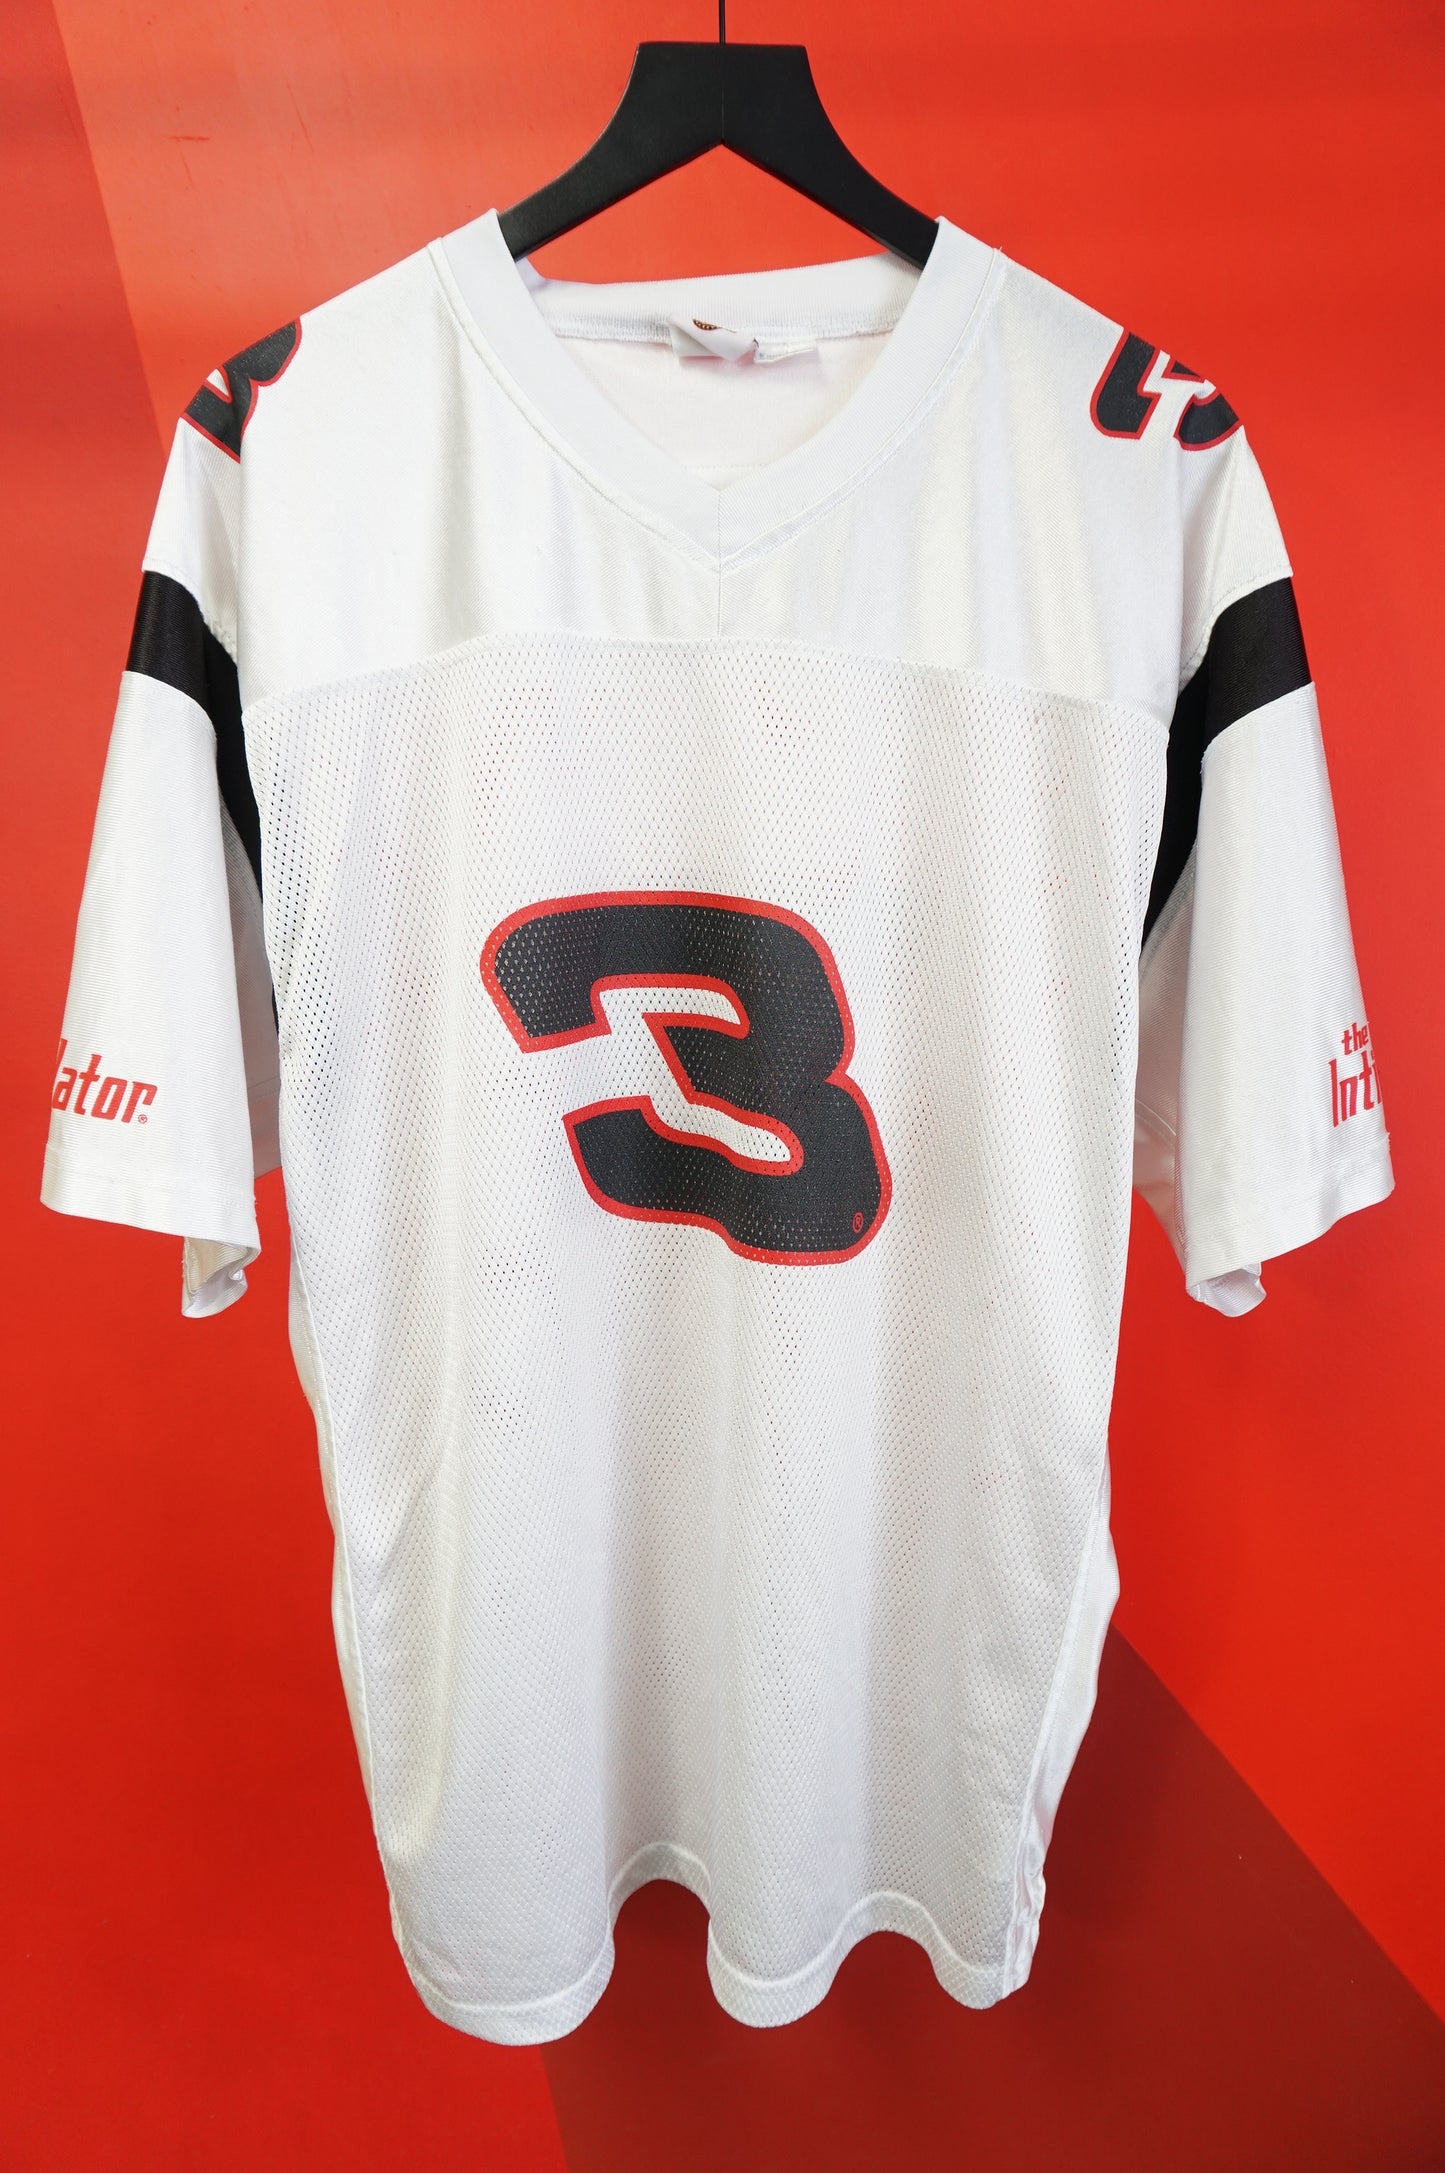 (L) Dale Earnhardt The Intimidator Football Jersey